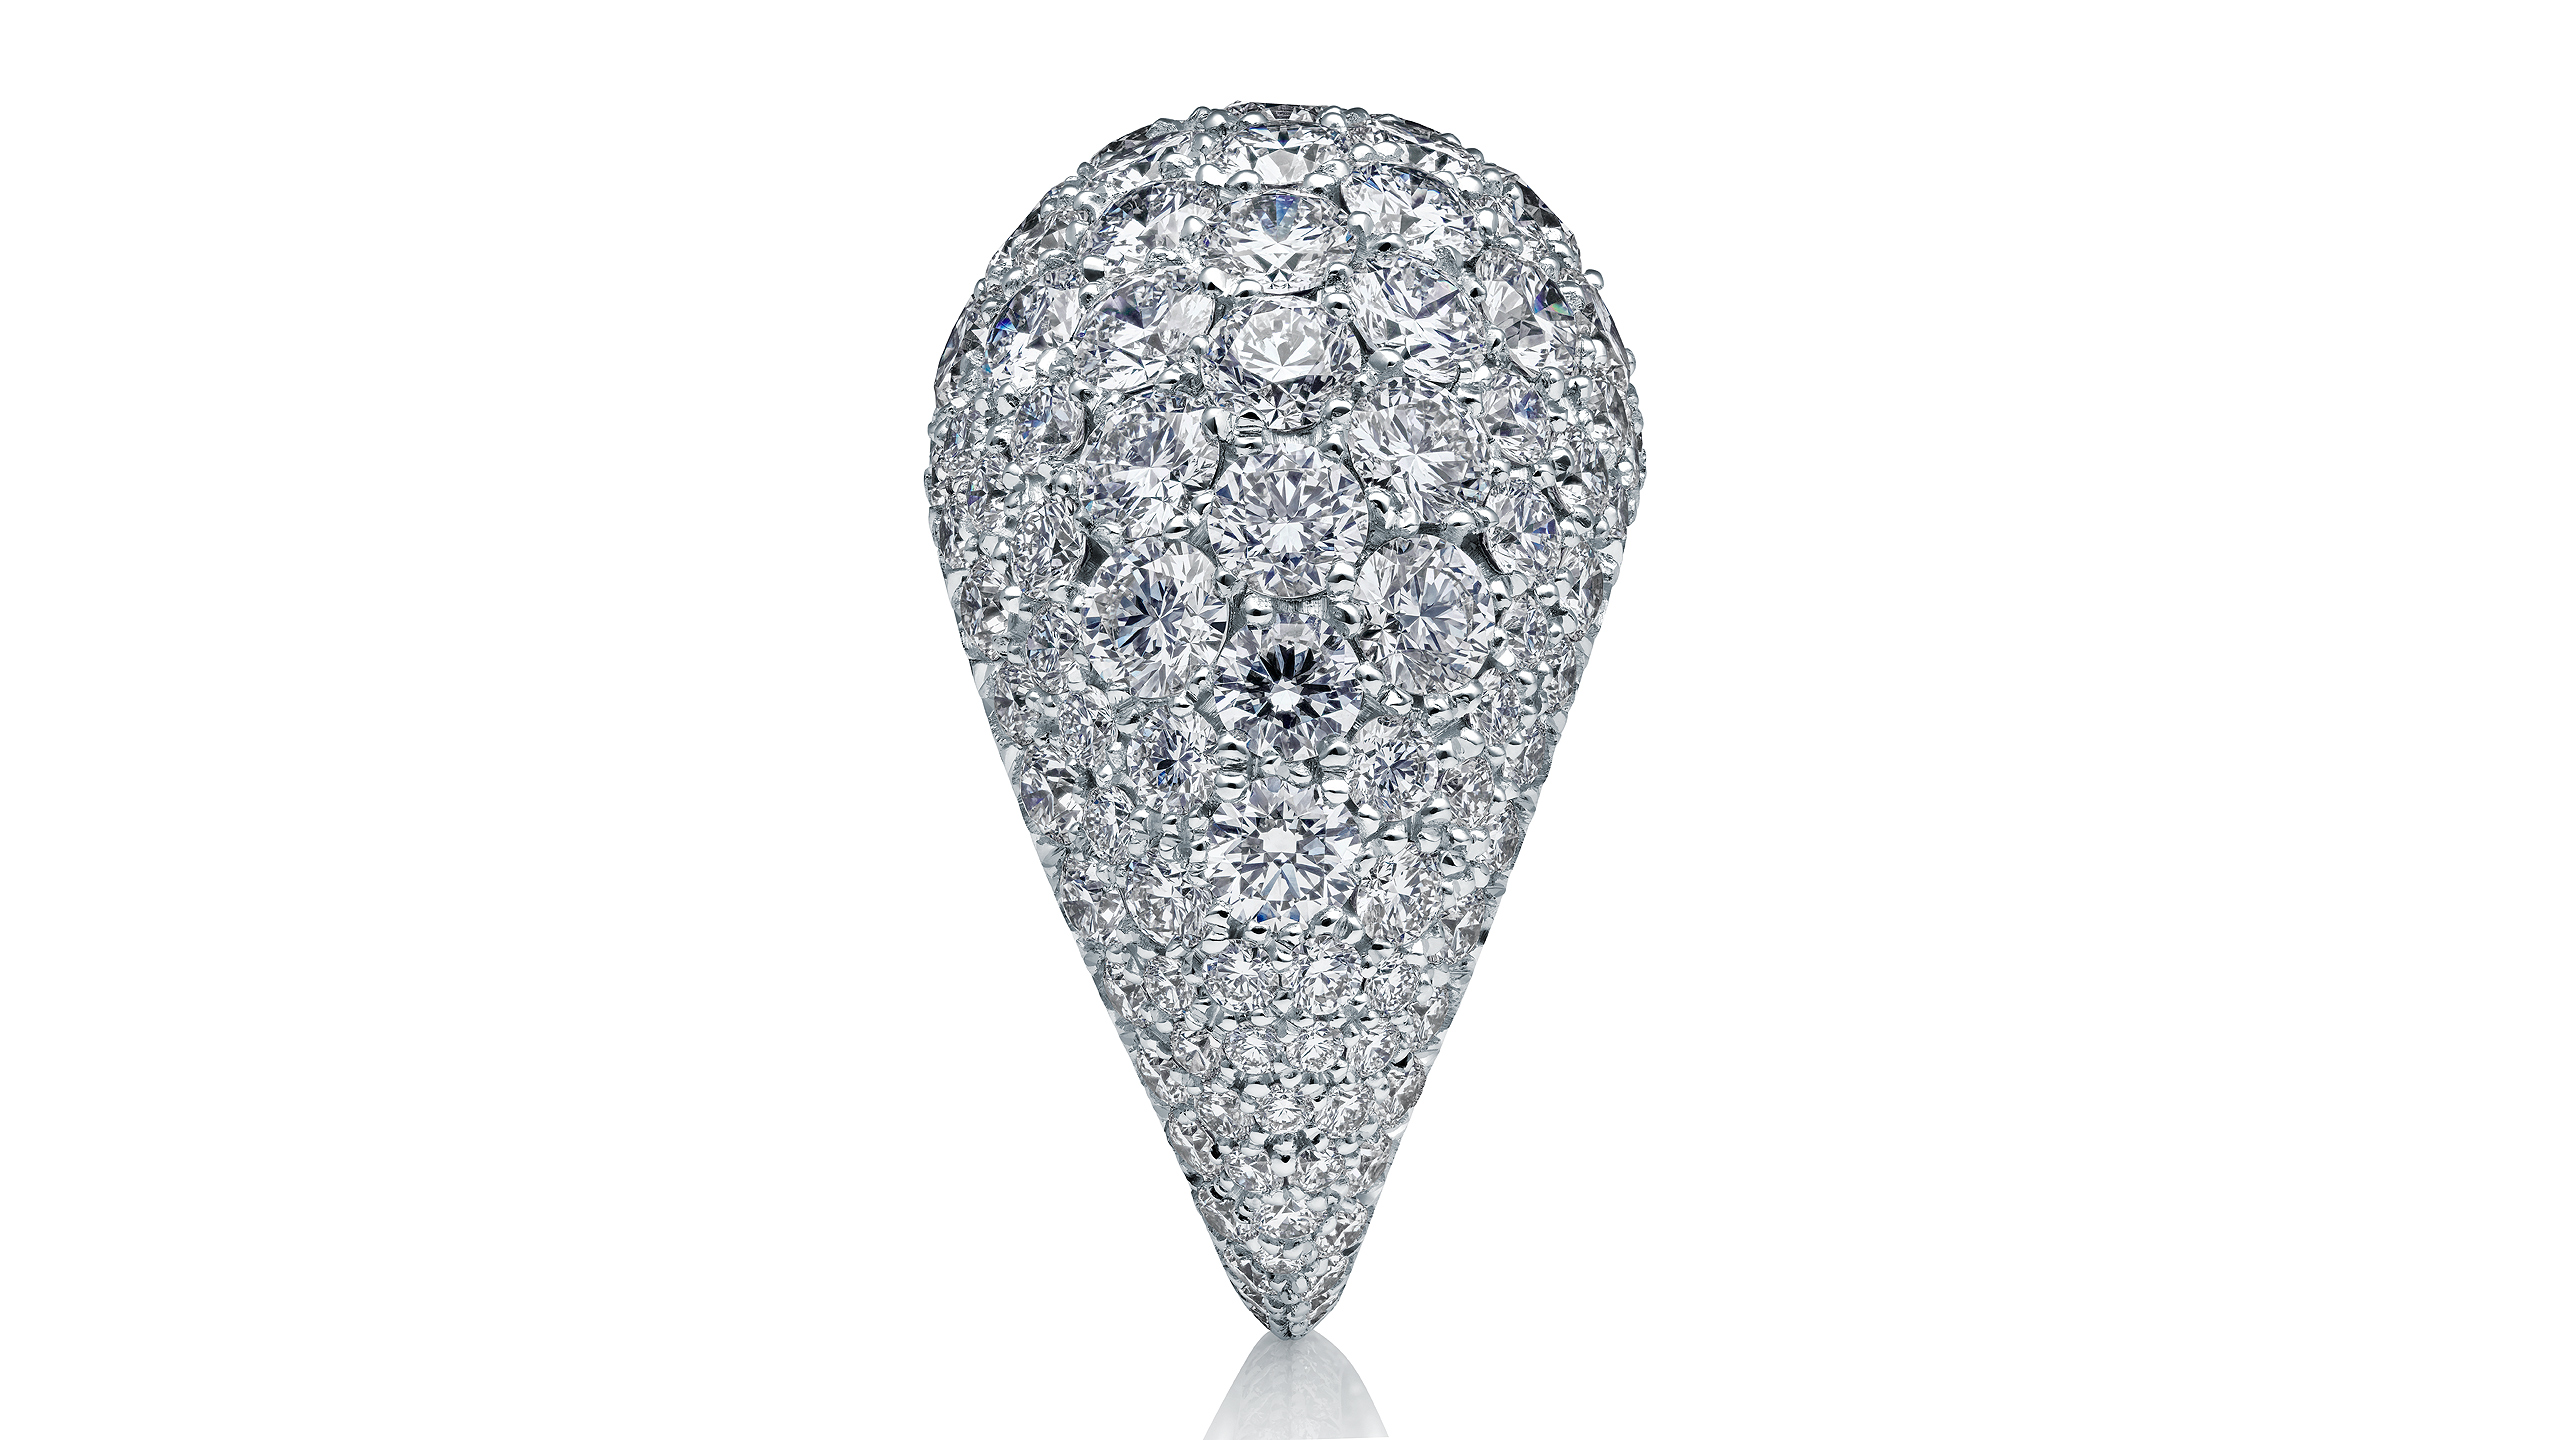 https://towejewels.com/wp-content/uploads/2015/06/Dune_ring_Diamond_drop_side_ny_OK_2560x1440_overview_web.jpg